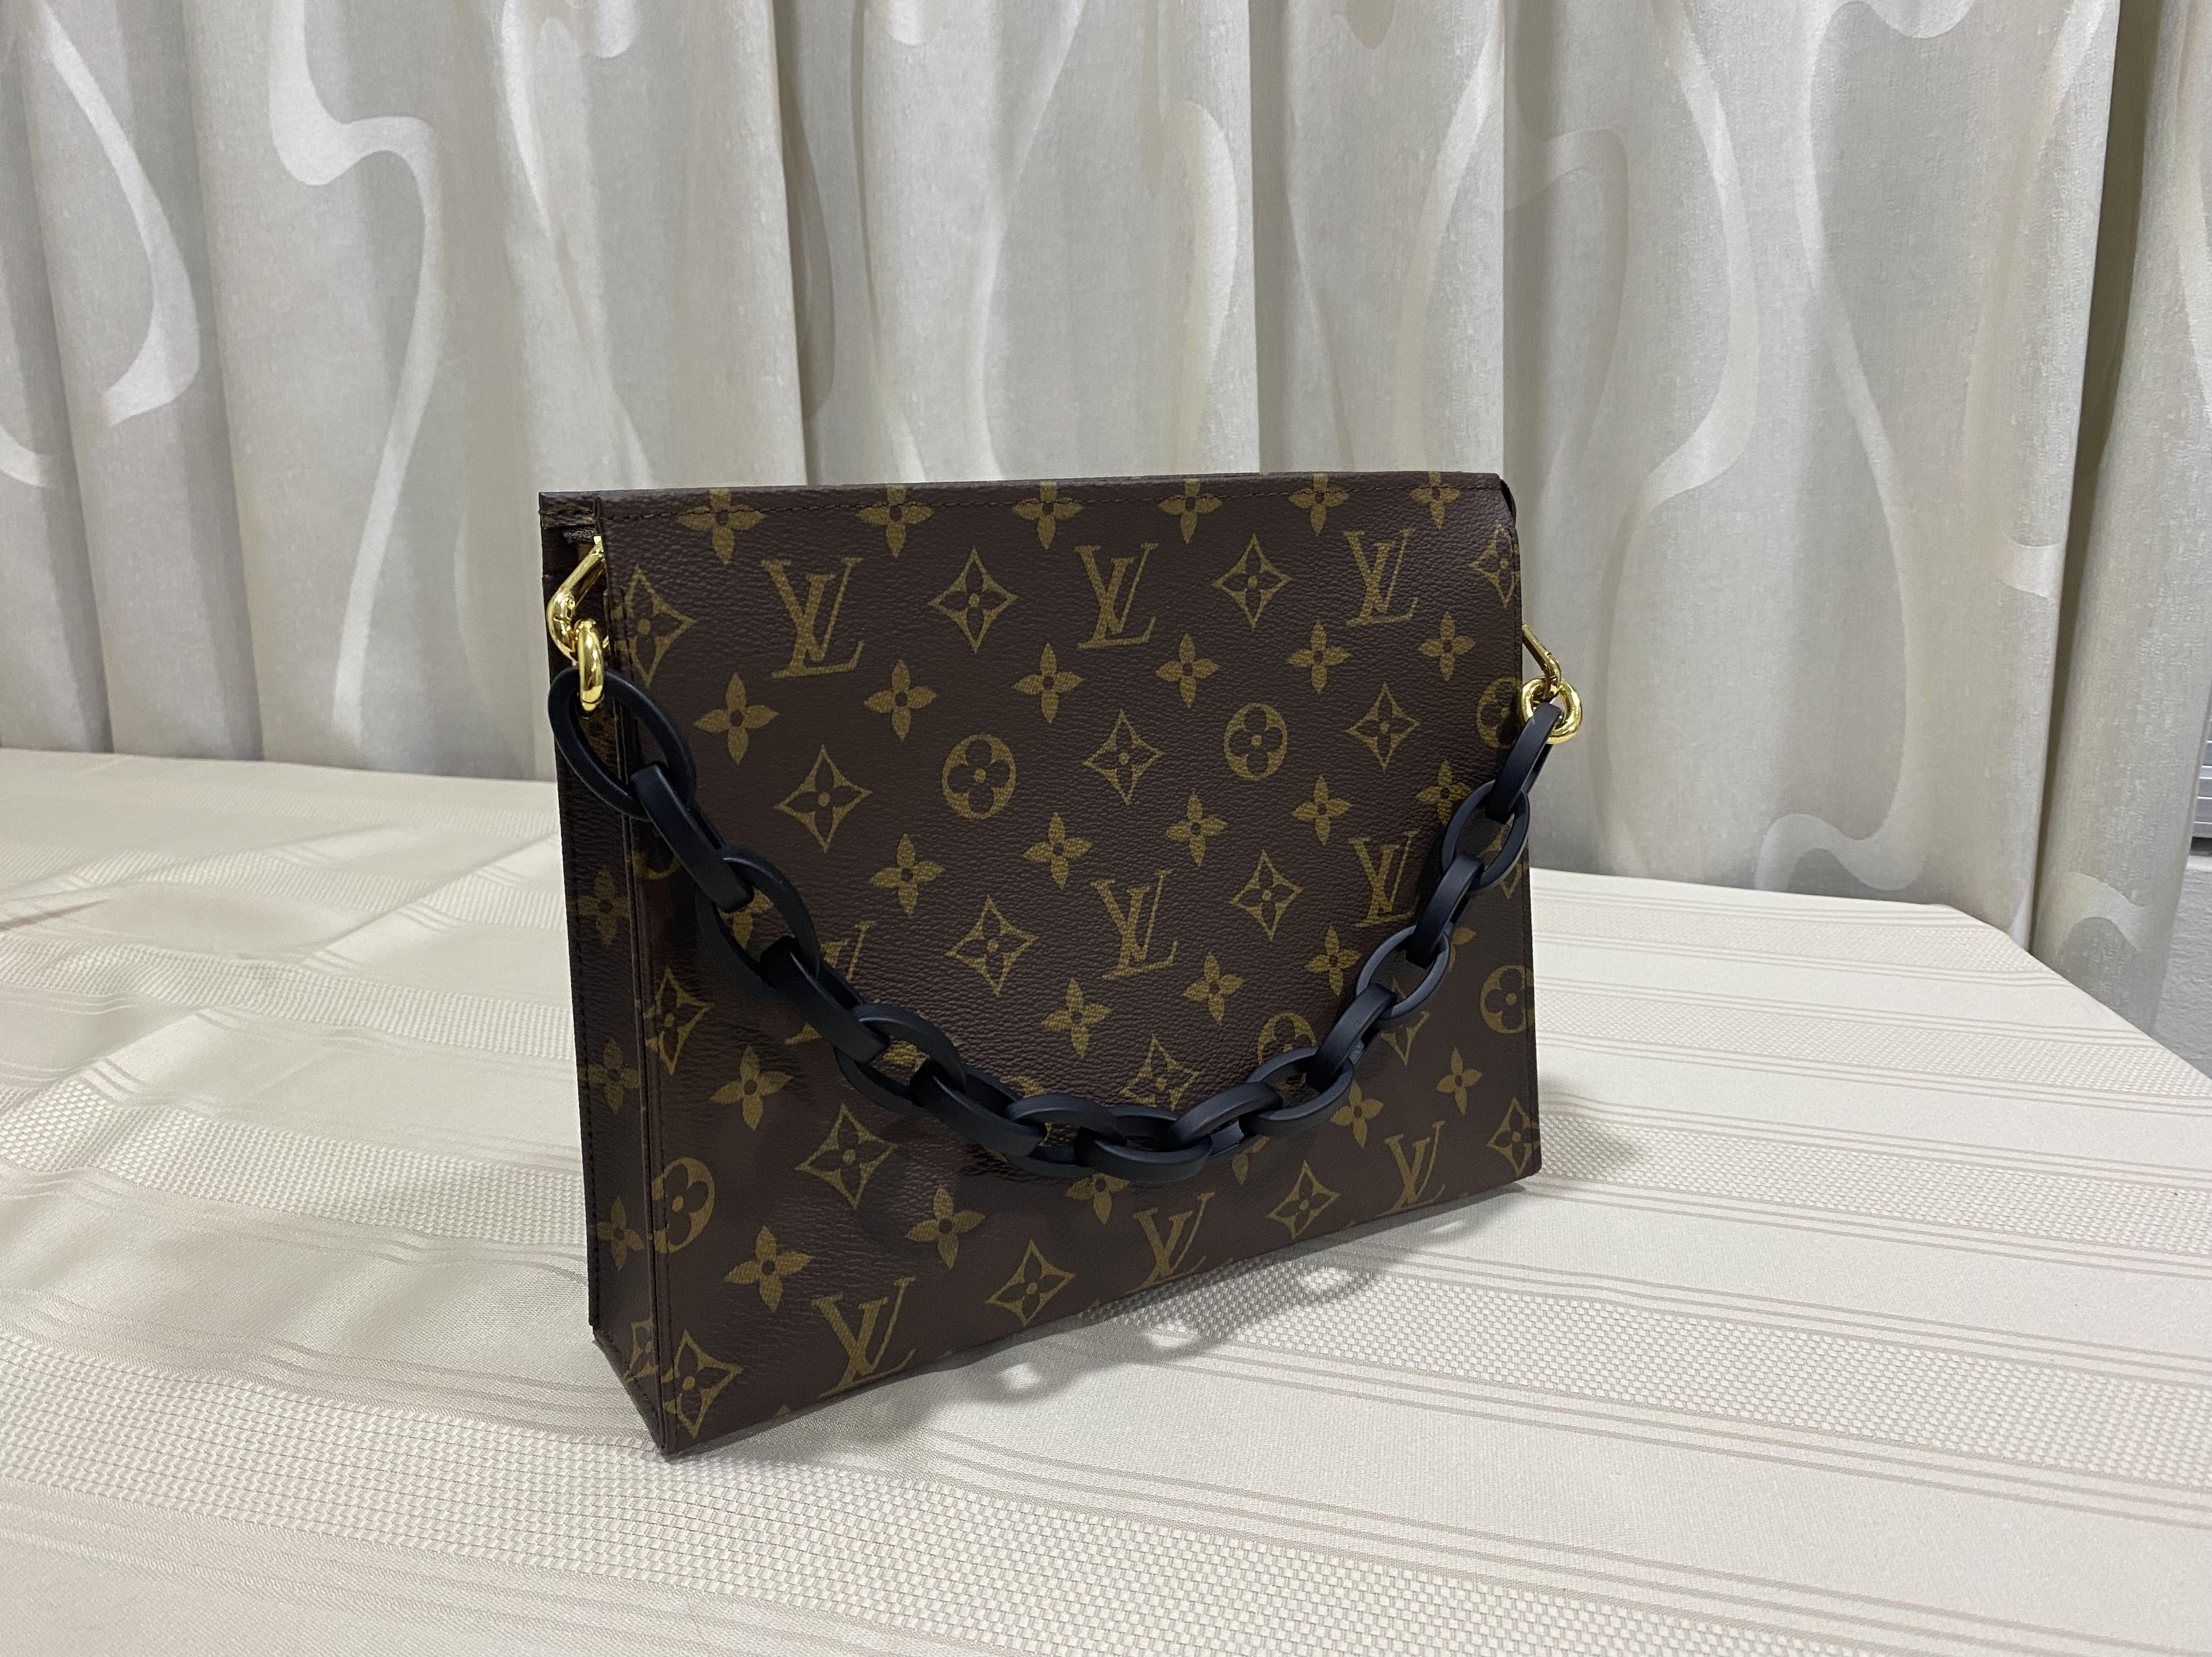 BN Toiletry 26 + high quality conversion kit. Louis Vuitton crossbody,  clutch, sling, pouch